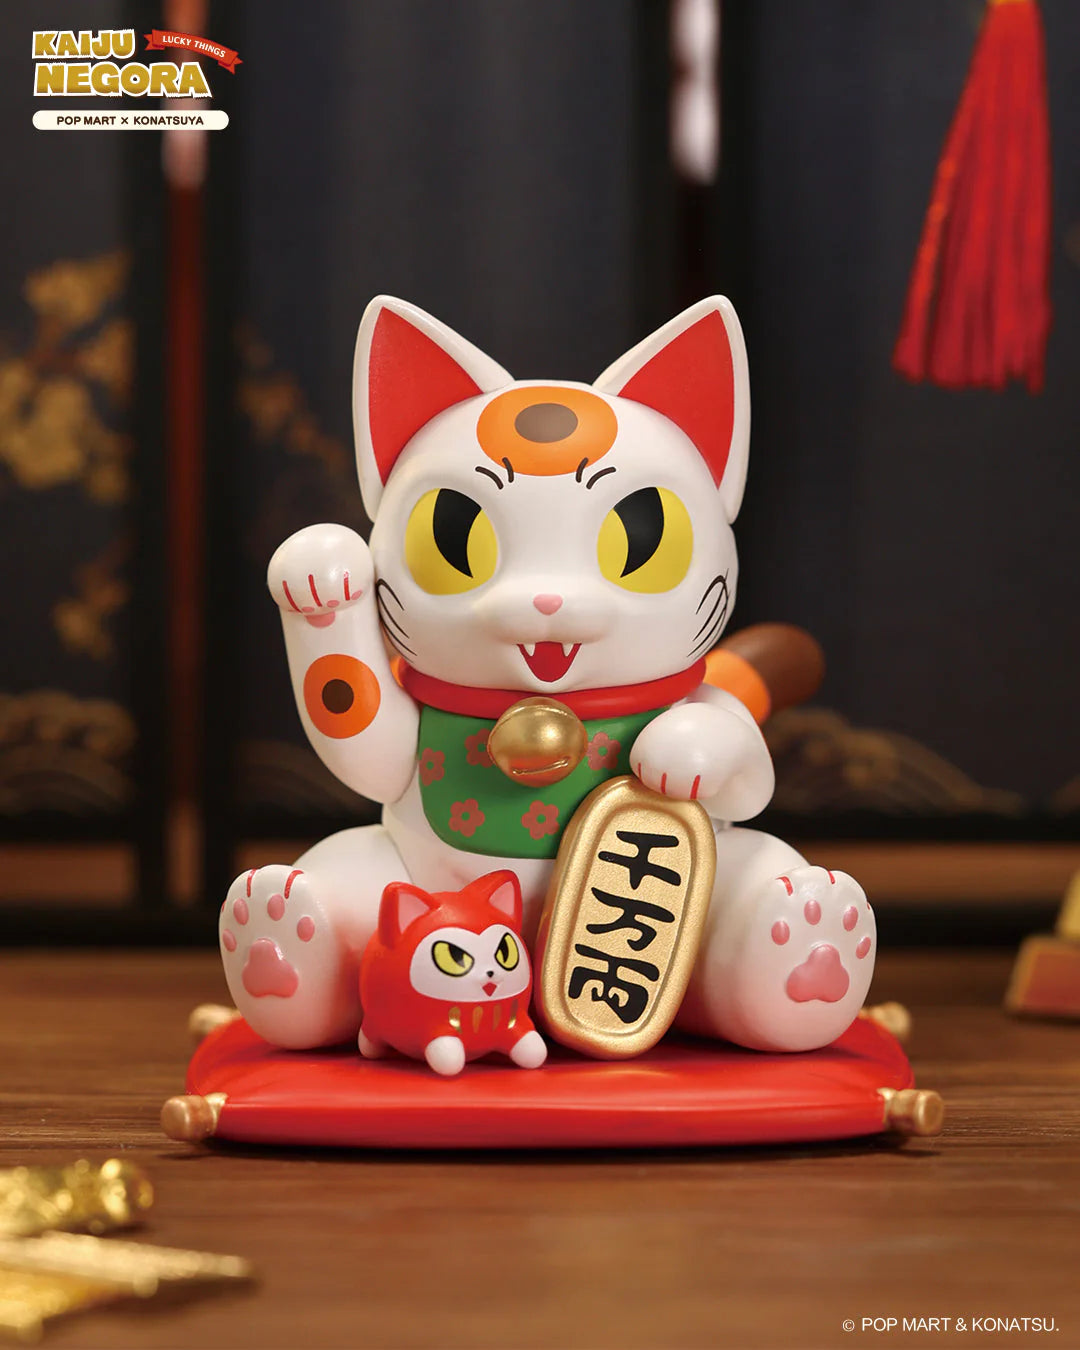 A cat figurine with a gold object from KONATSUYA Negora Lucky Things Blind Box Series.